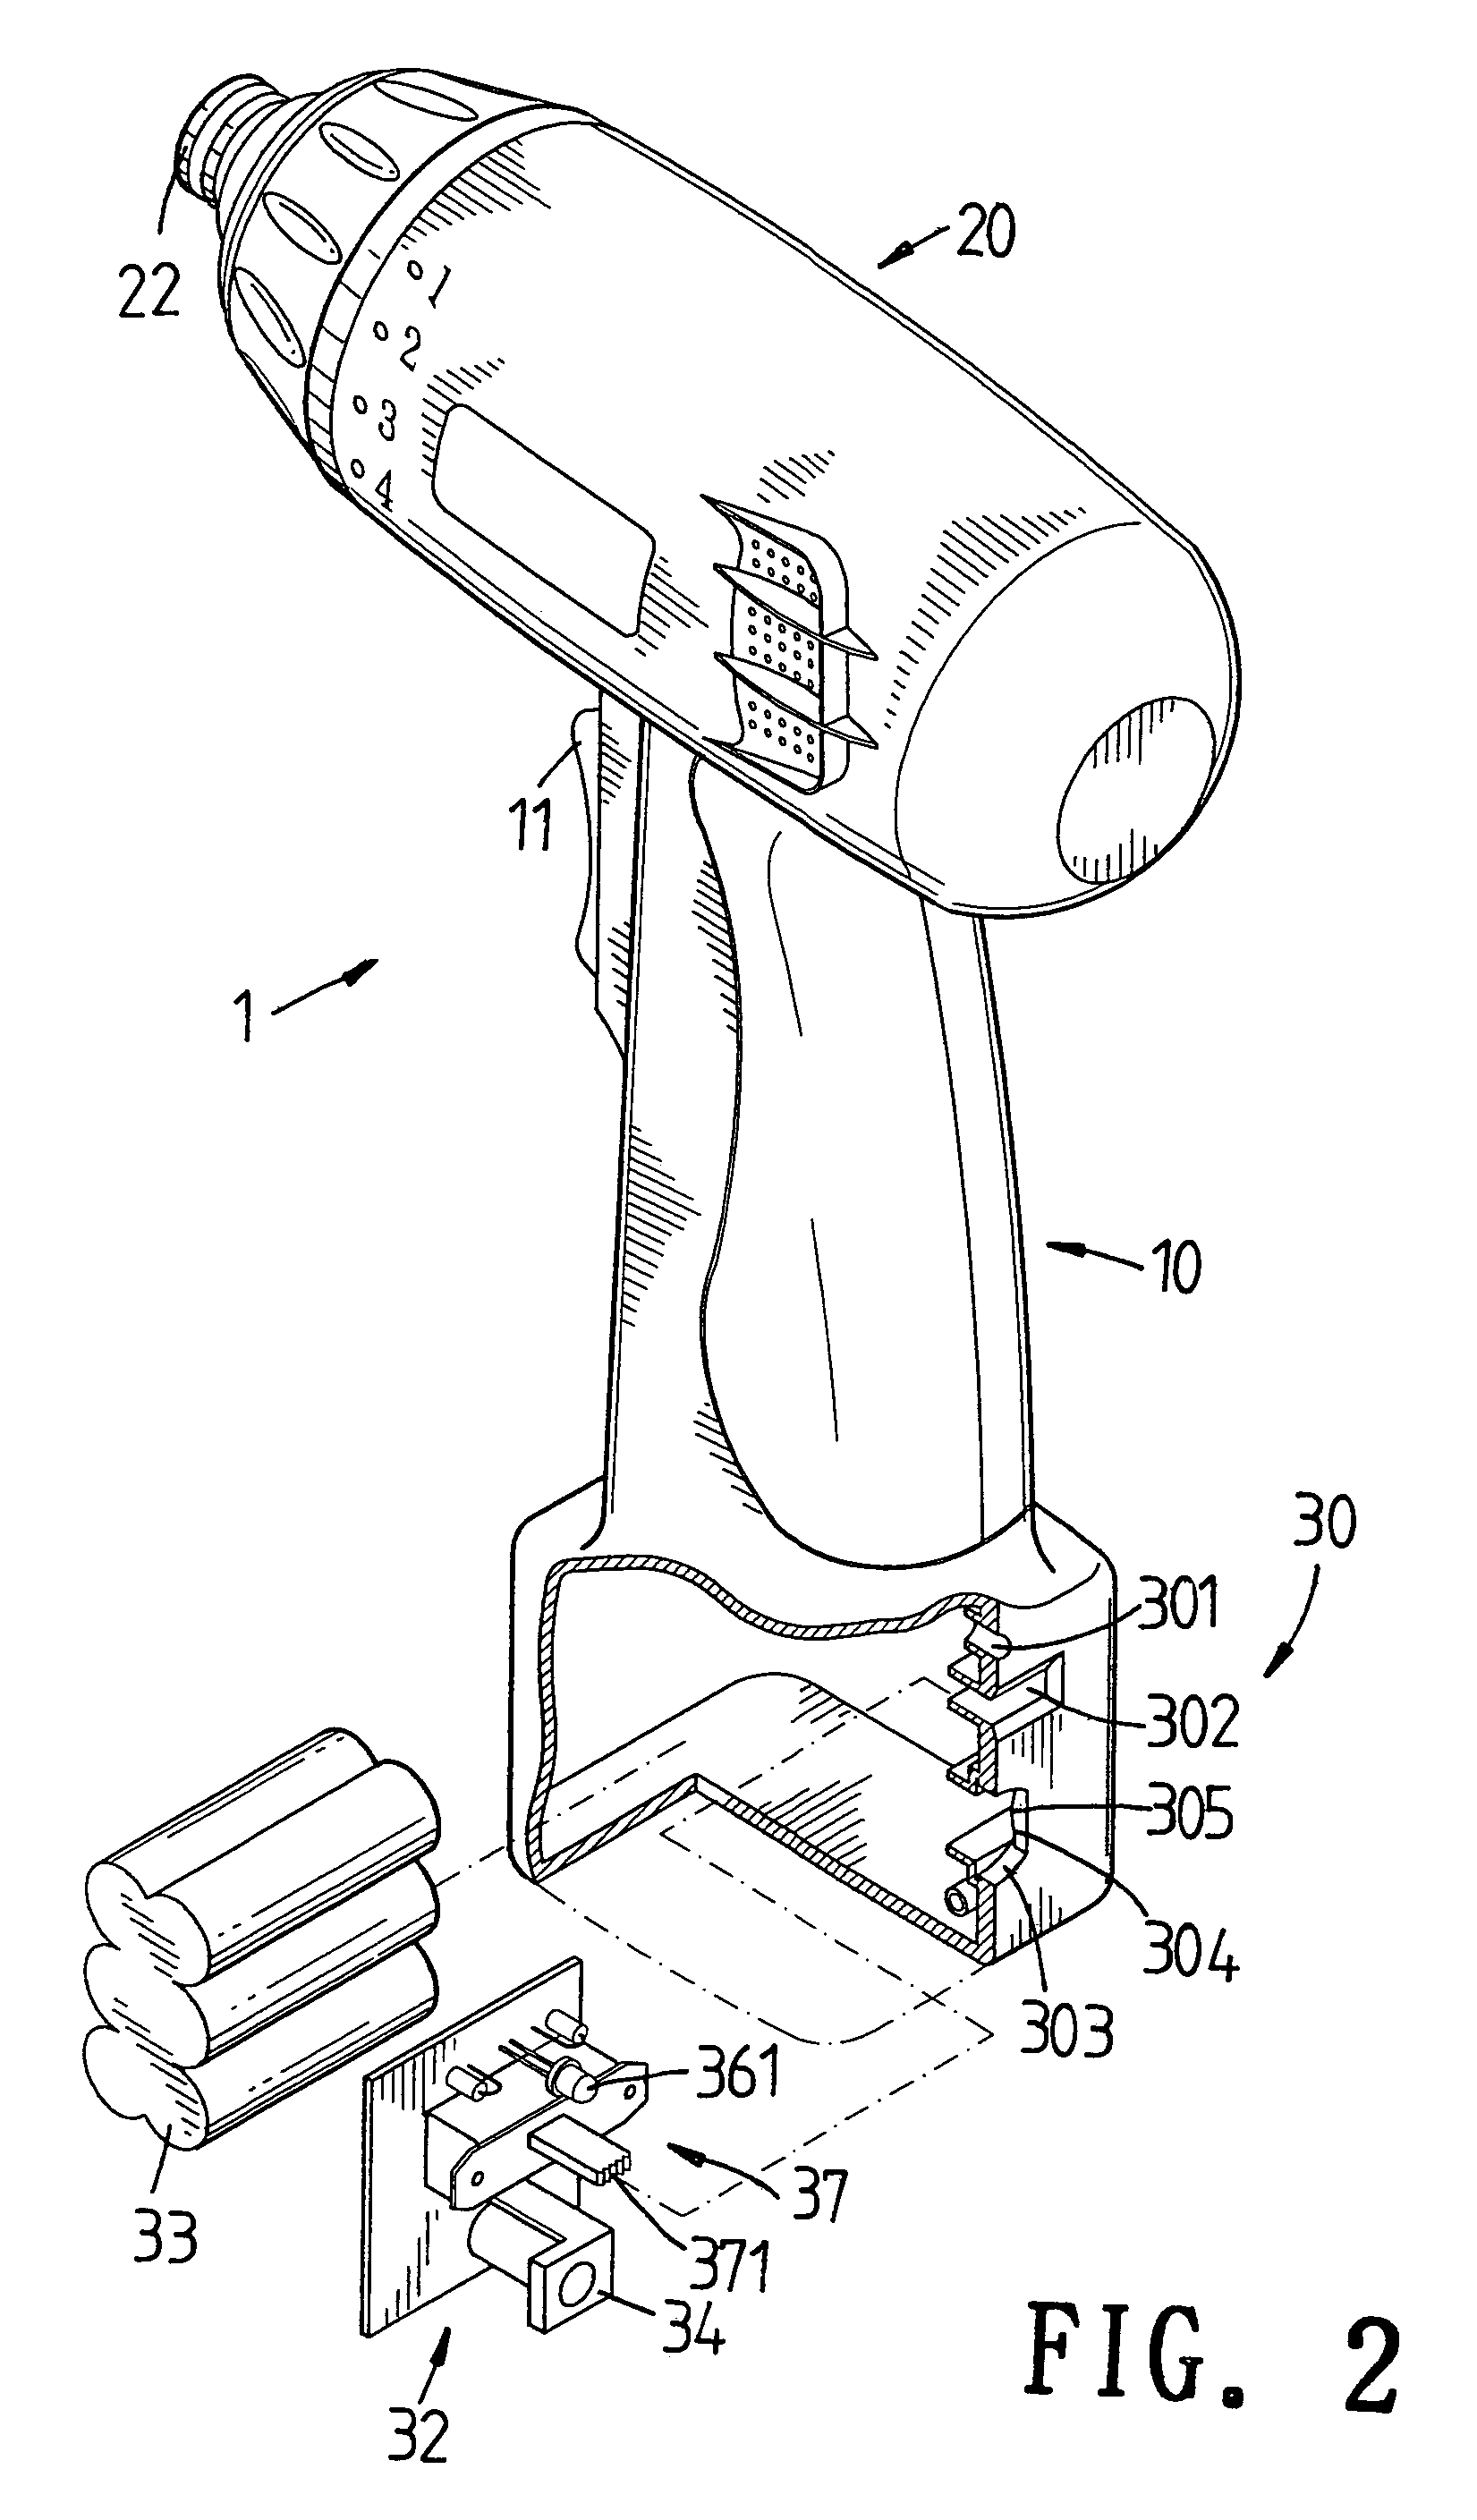 Power supply structure of electromotive tool